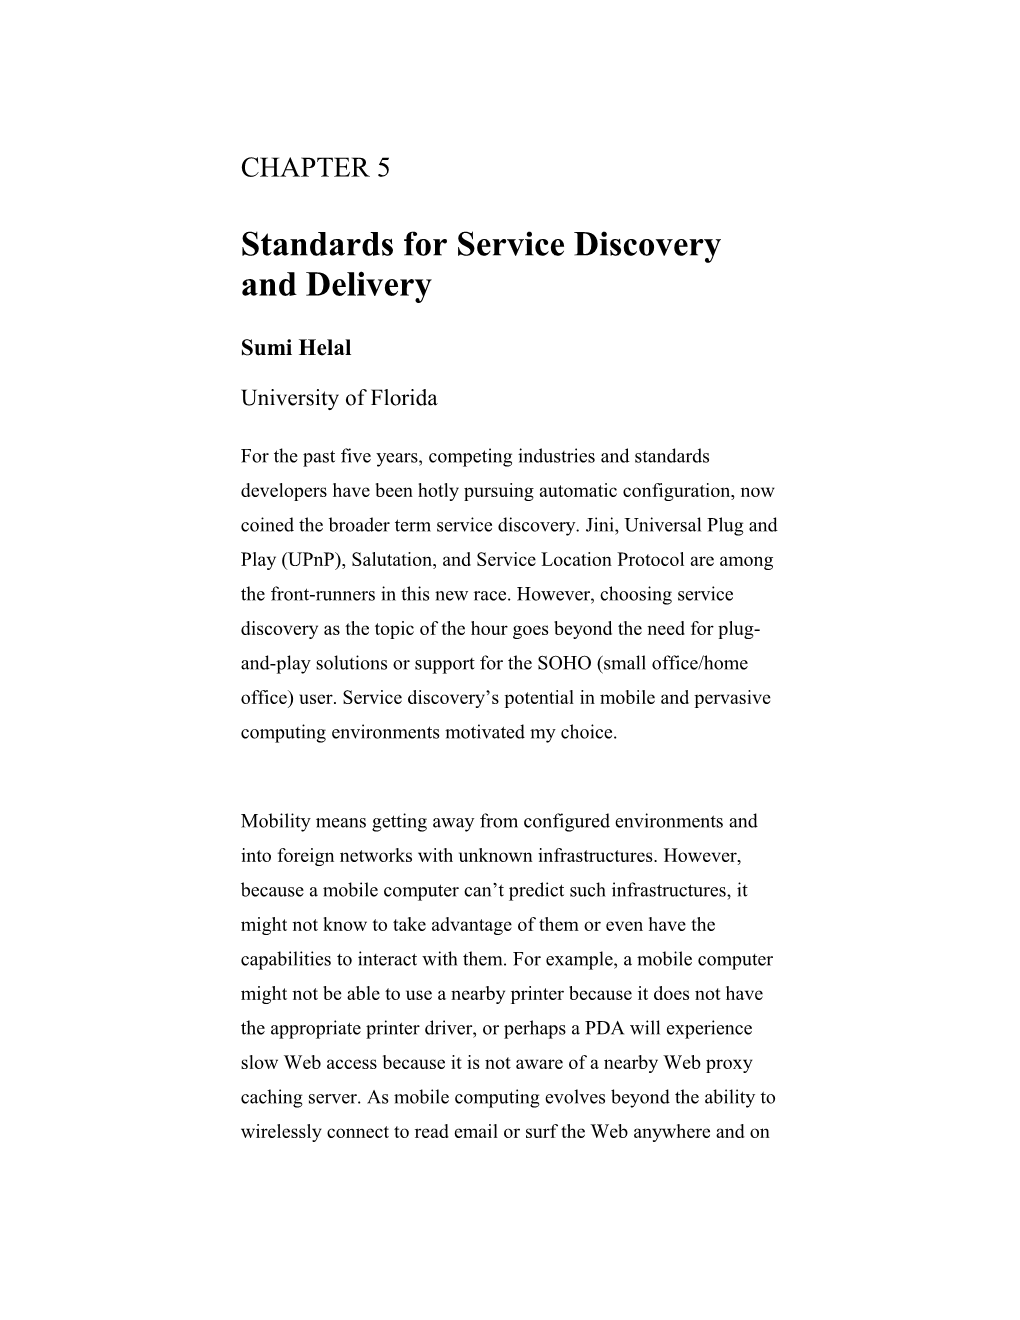 Standards for Service Discovery and Delivery